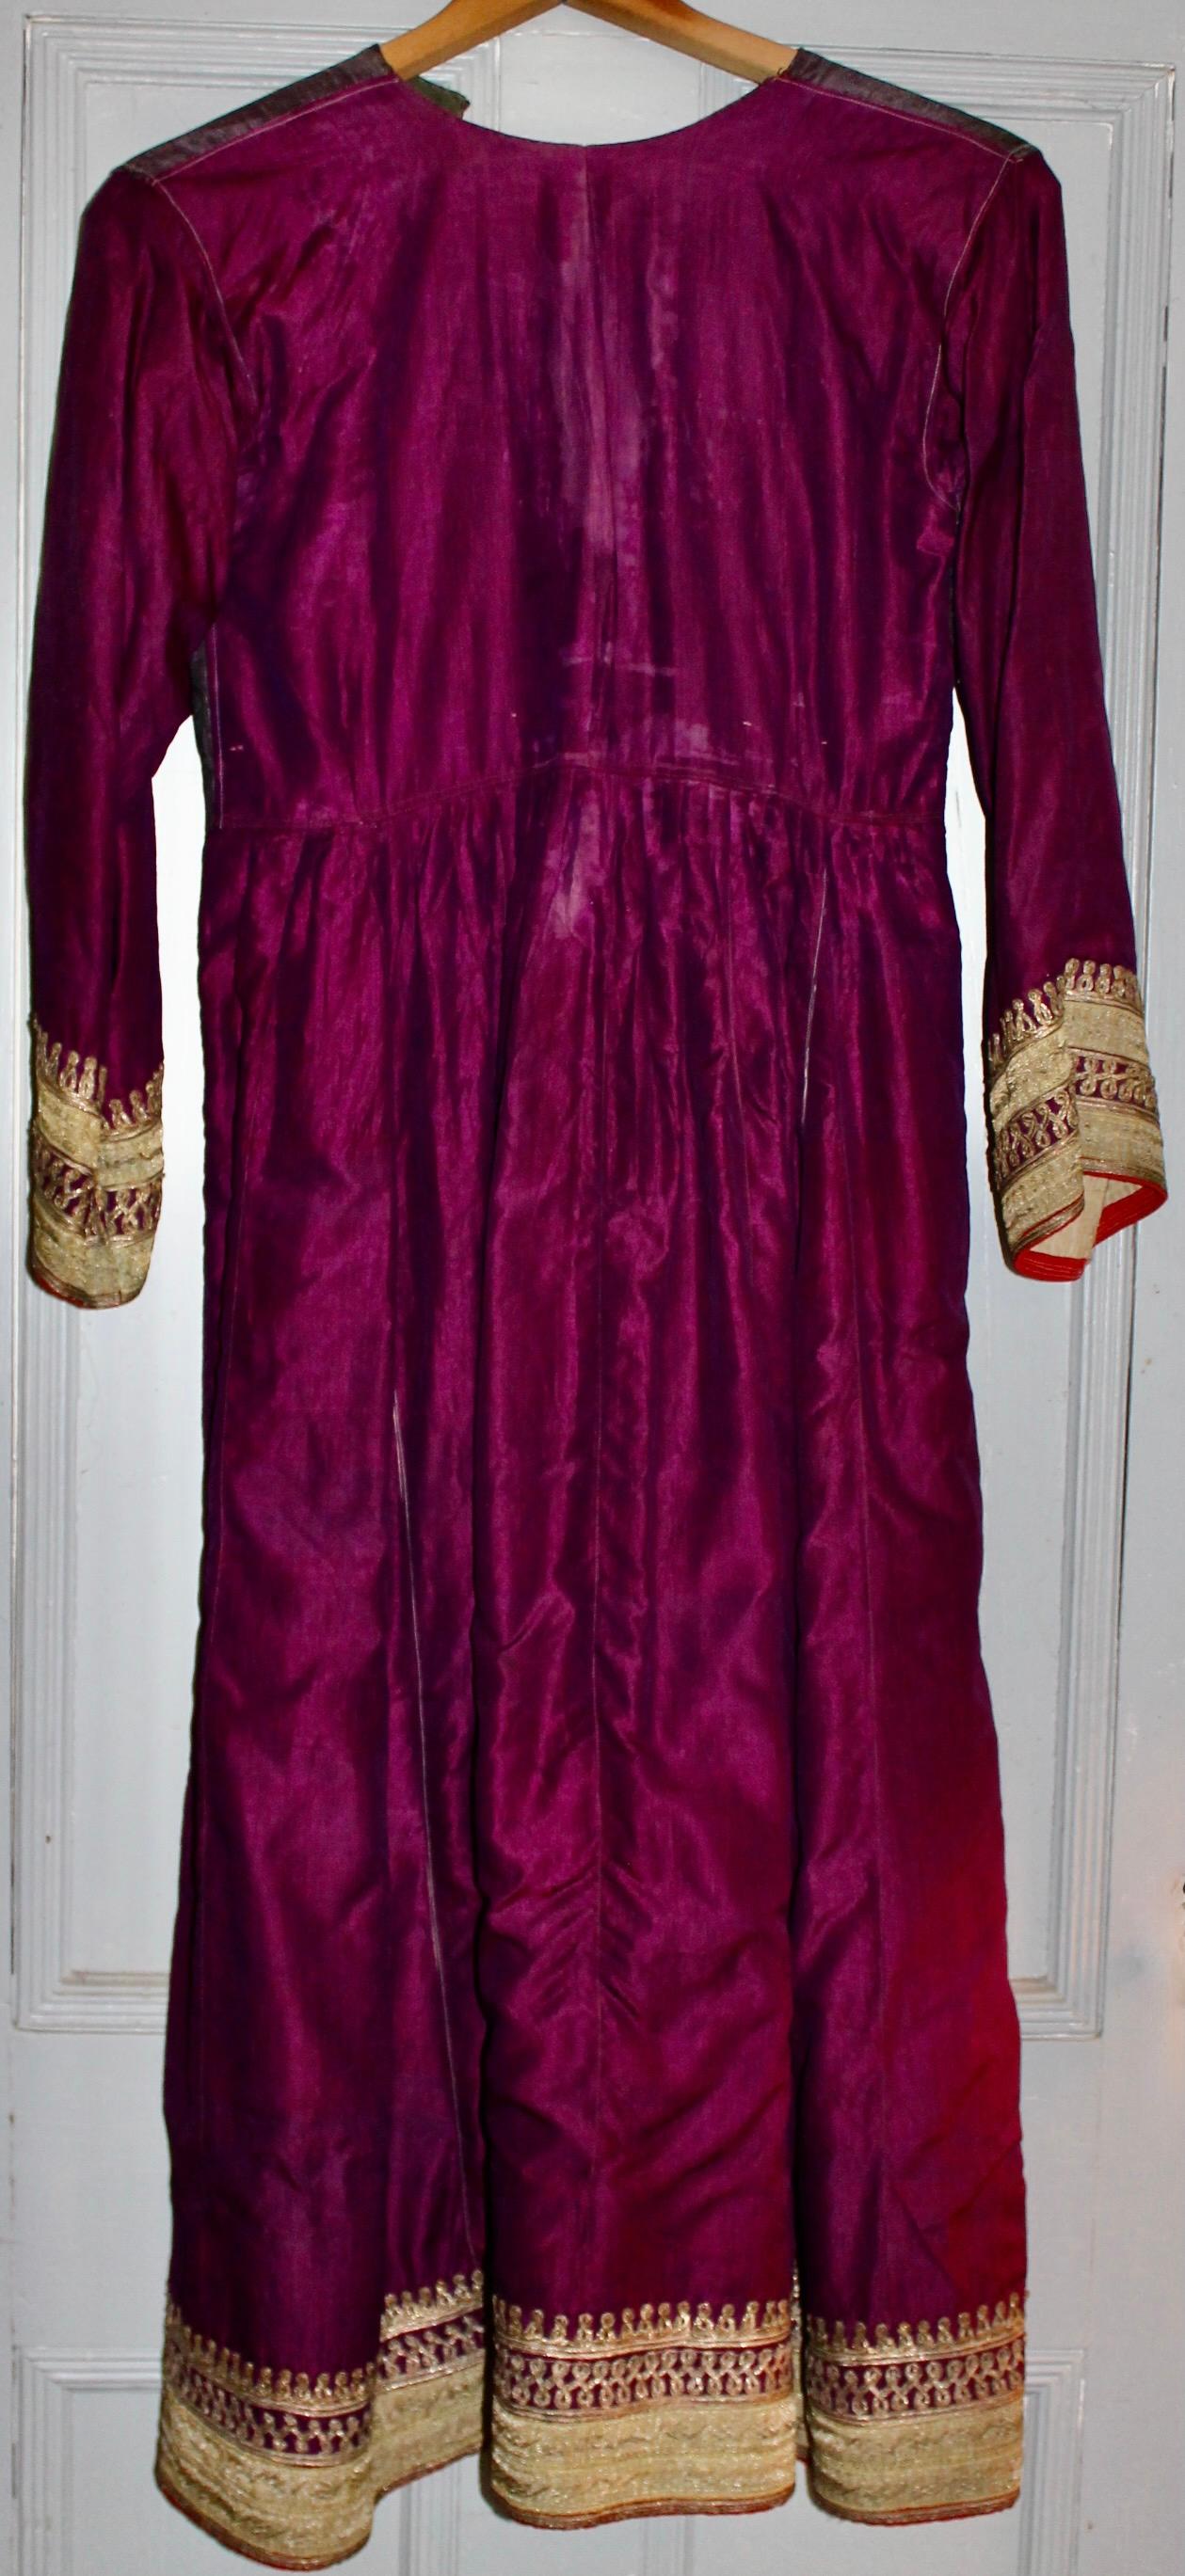 Hand woven violet silk dress with gold braid appliqué decoration on hem and sleeve cuffs.  Fully lined in cotton and fine linen. Length of sleeve 20.5